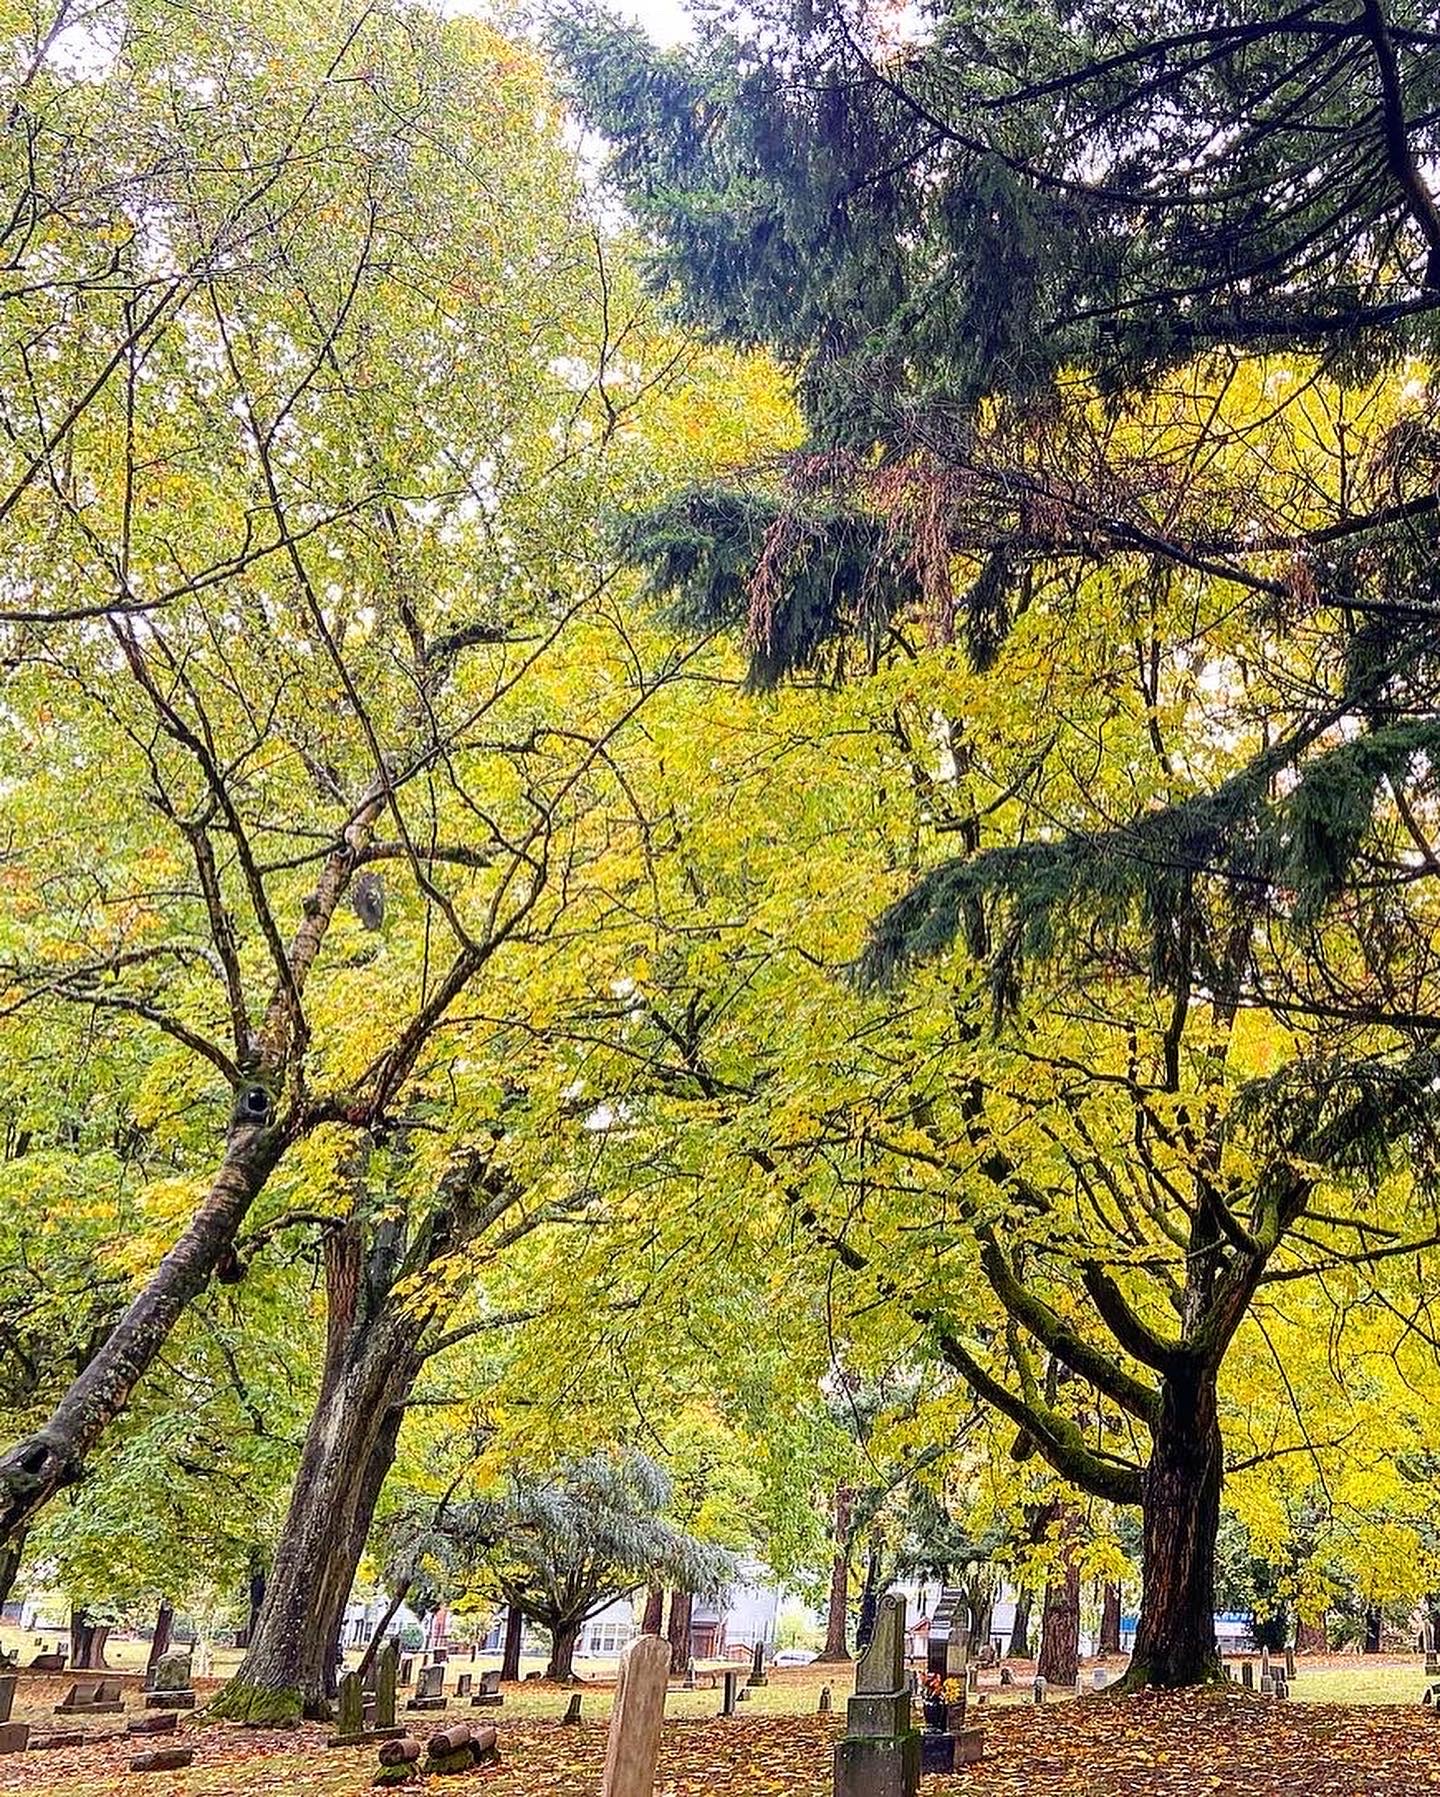 a cemetery with the image dominated by beautiful yellow and chartreuse trees